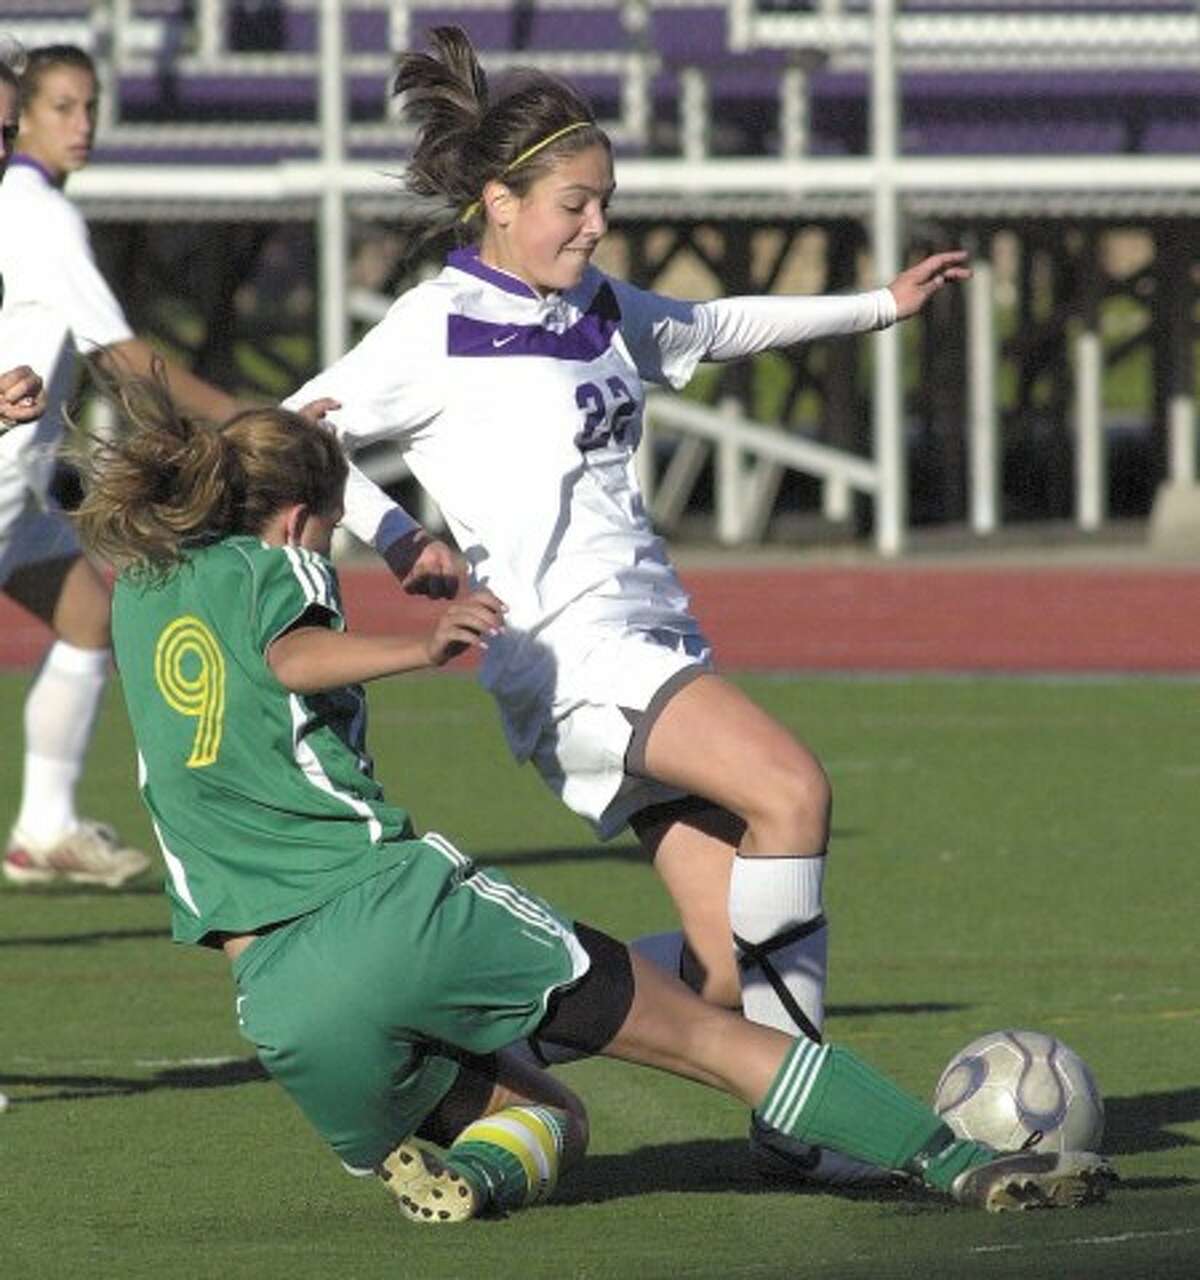 Photo by John Nash - Westhill''s Tessa Dunster, top, scored three goals to lead her team to the City Championship on Tuesday.